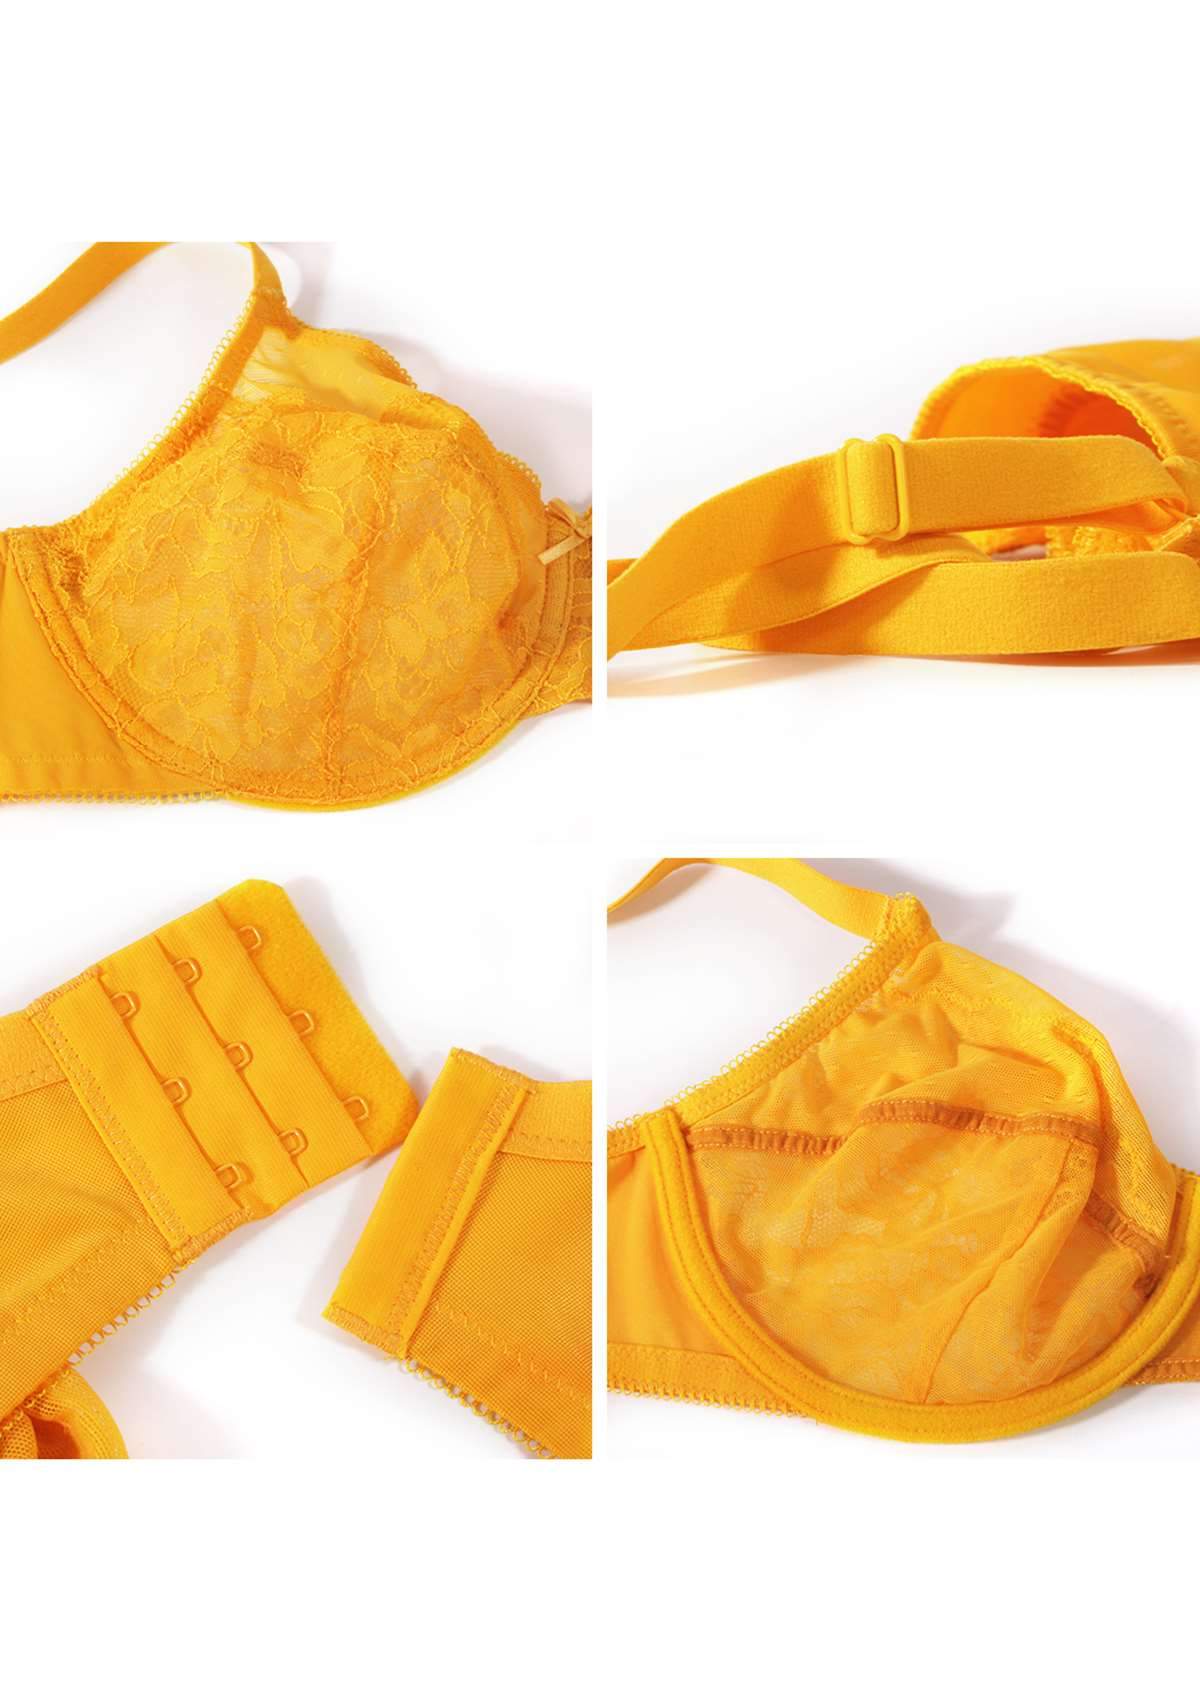 HSIA Enchante Bra And Panty Sets: Unpadded Bra With Back Support - Cadmium Yellow / 40 / D